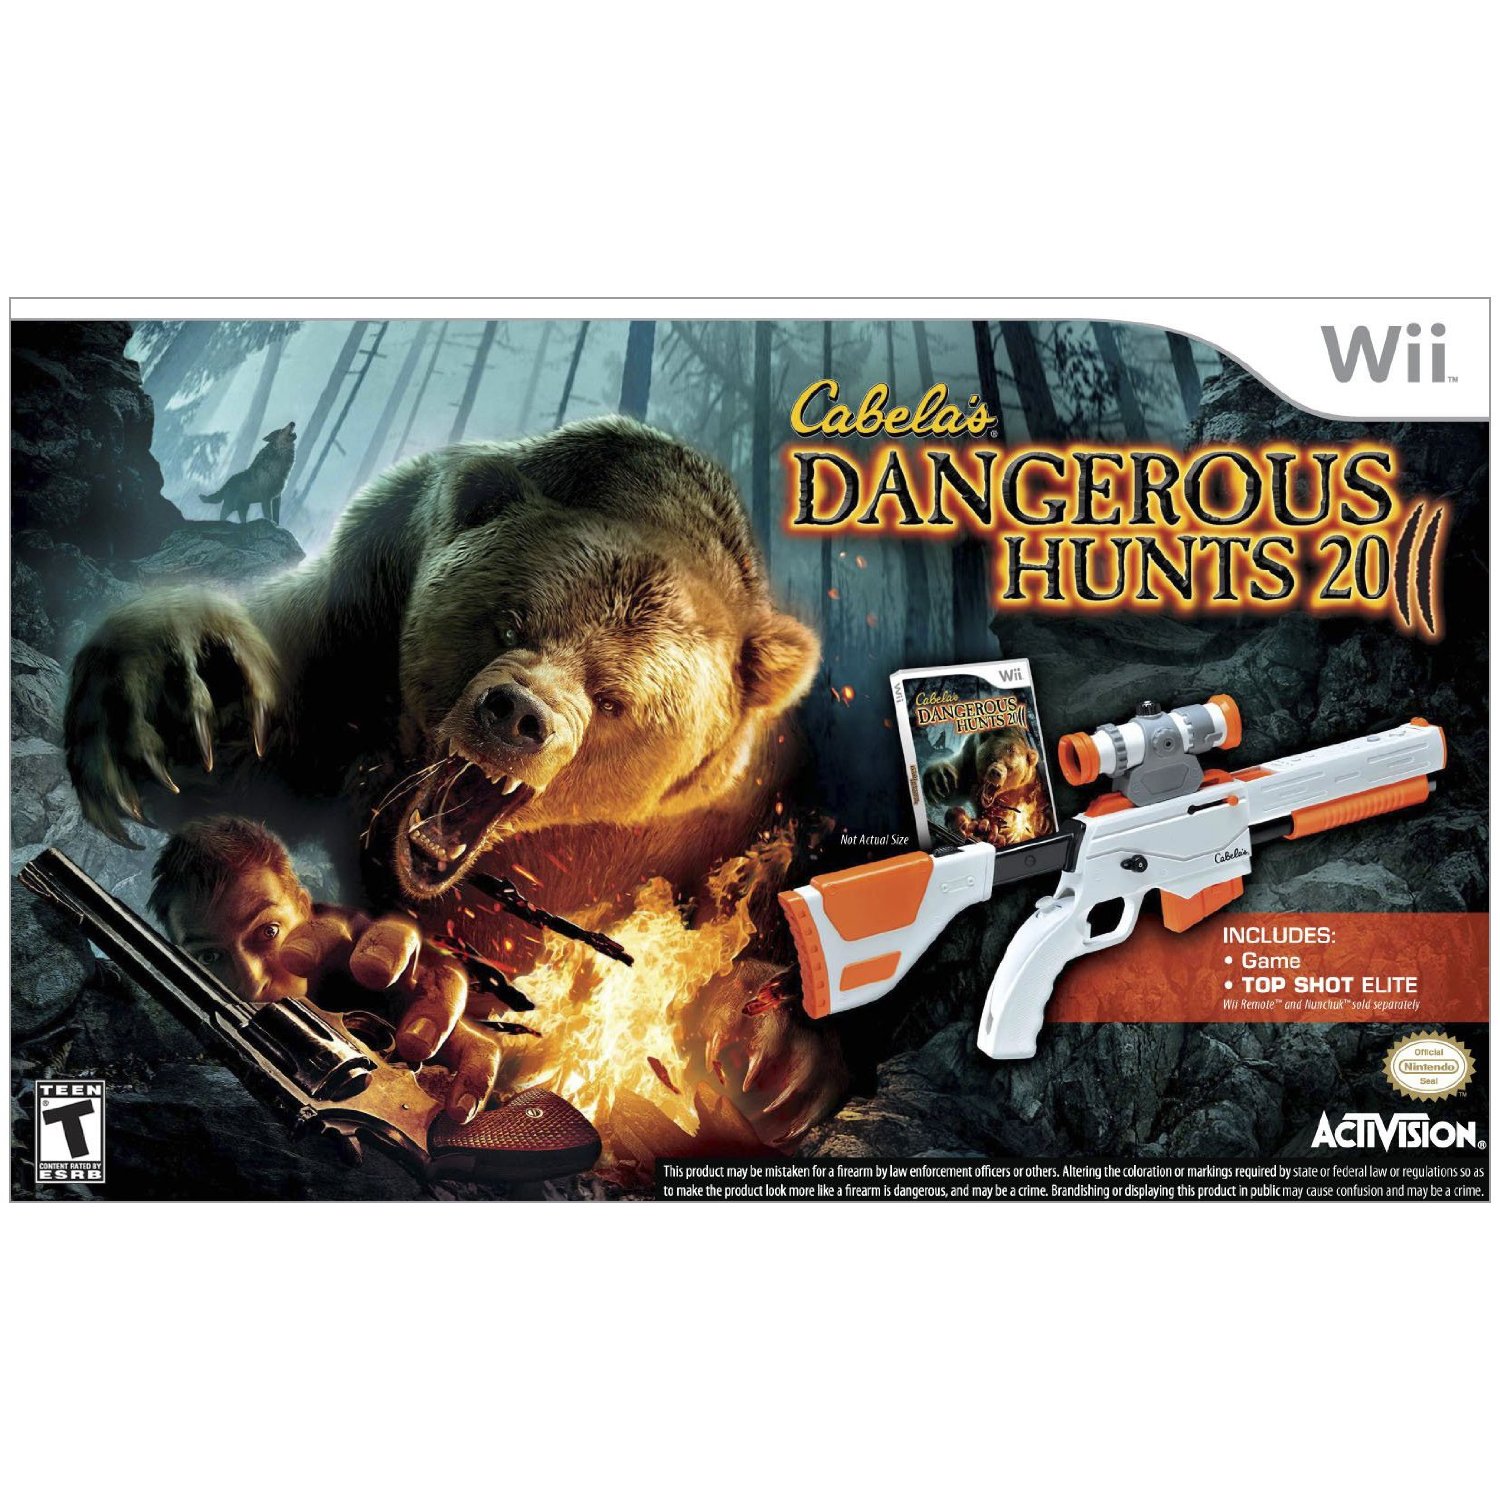 WII: CABELAS DANGEROUS HUNTS 2011 (GAME) - $4.00 : Cap'n Games, Inc., 1000s  of New and Used Video Games!